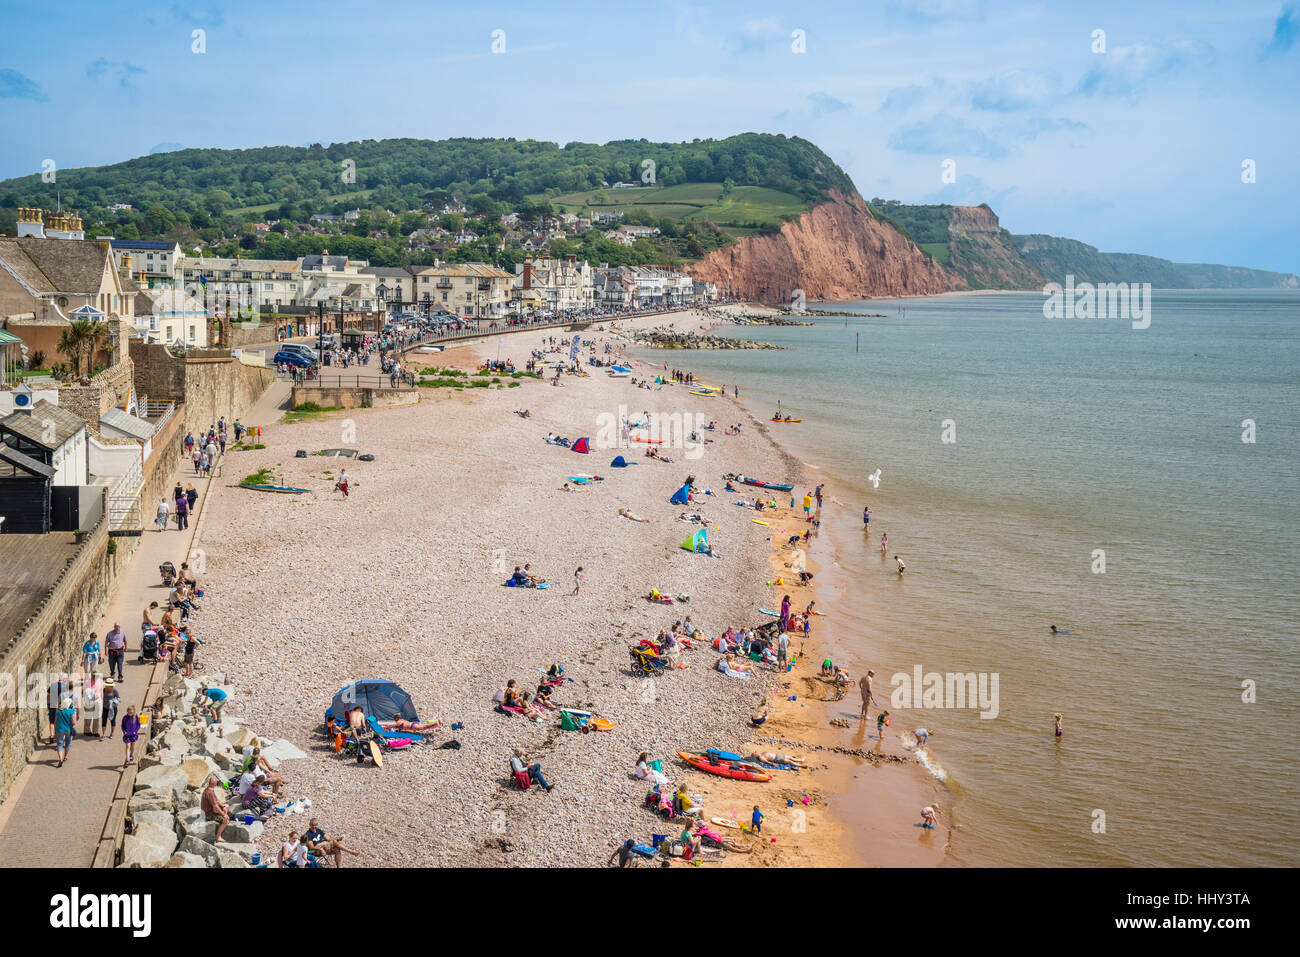 Great Britain, South West England, East Devon, Sidmouth, view of Sidmouth Beach and the red-coloured cliff face of Salcombe Hill Stock Photo